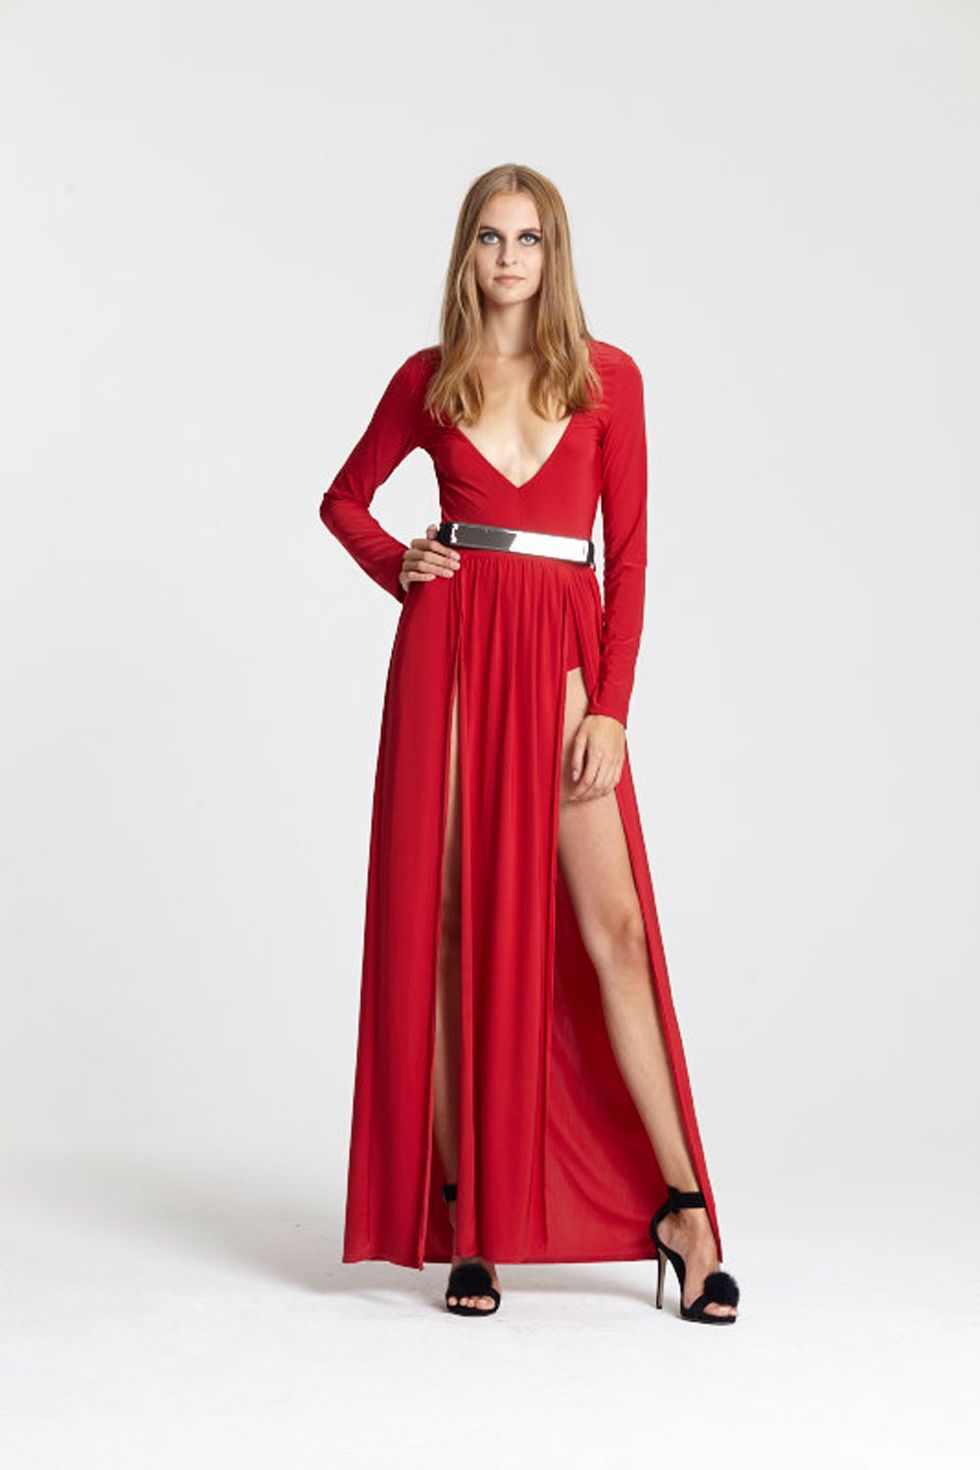 <a target="_blank" href="http://www.boohoo.com/going-out-dresses/clara-strappy-detail-bodycon-midi-dress/invt/azz31749">Buy the dress</a> and <a target="_blank" href="http://www.boohoo.com/high-heels/paige-faux-fur-pom-two-part-heels/invt/azz00139">heels</a>